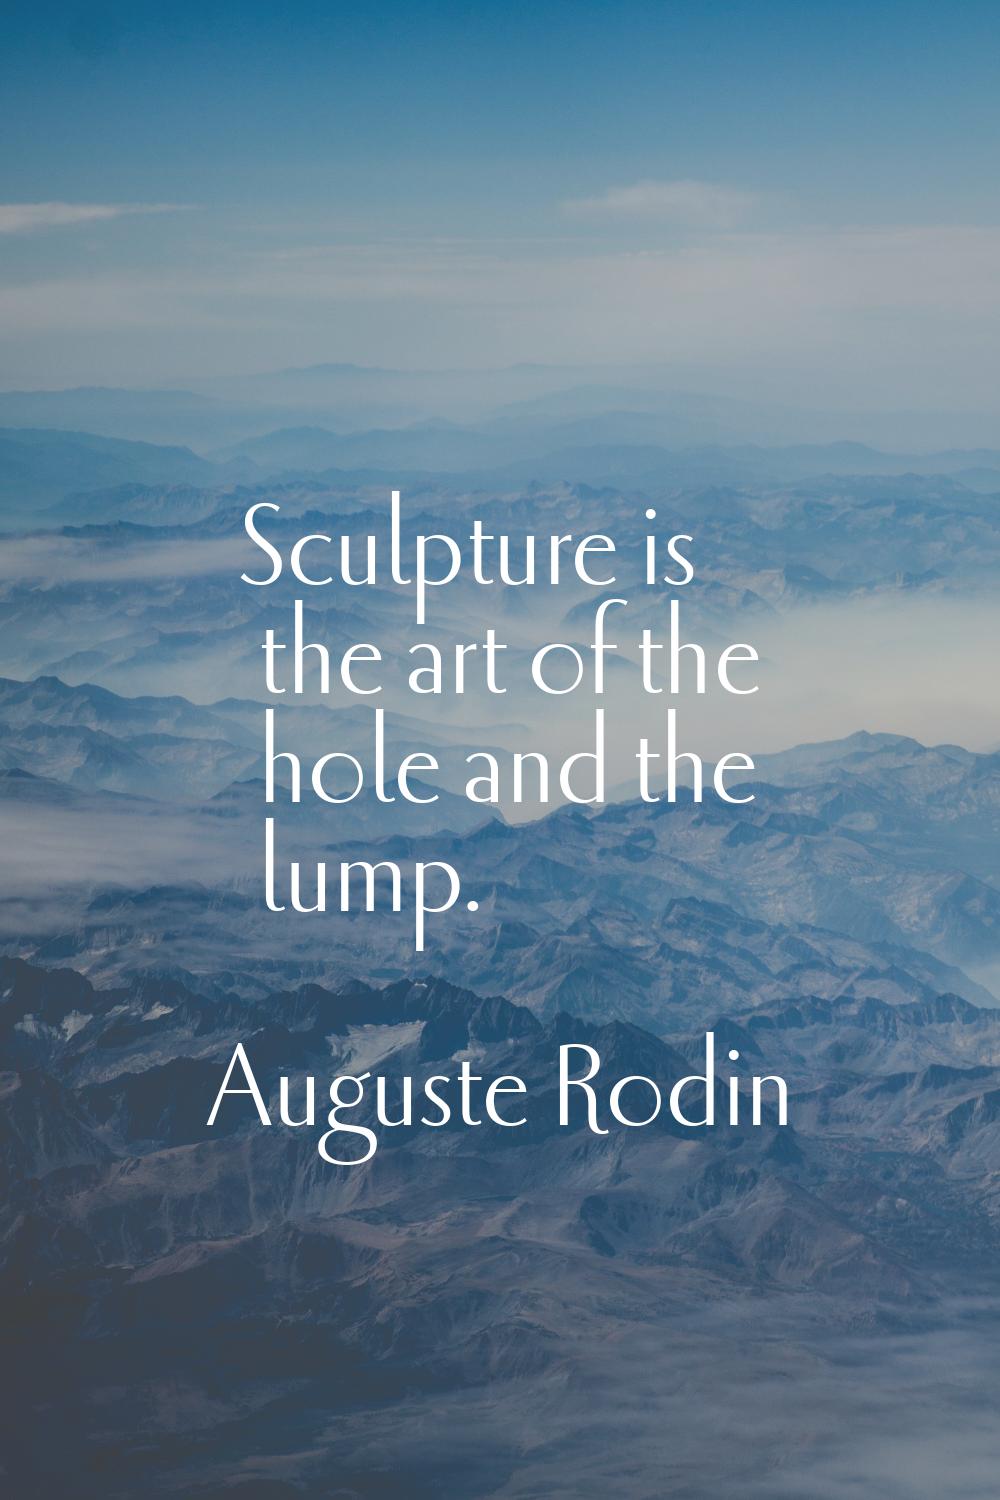 Sculpture is the art of the hole and the lump.